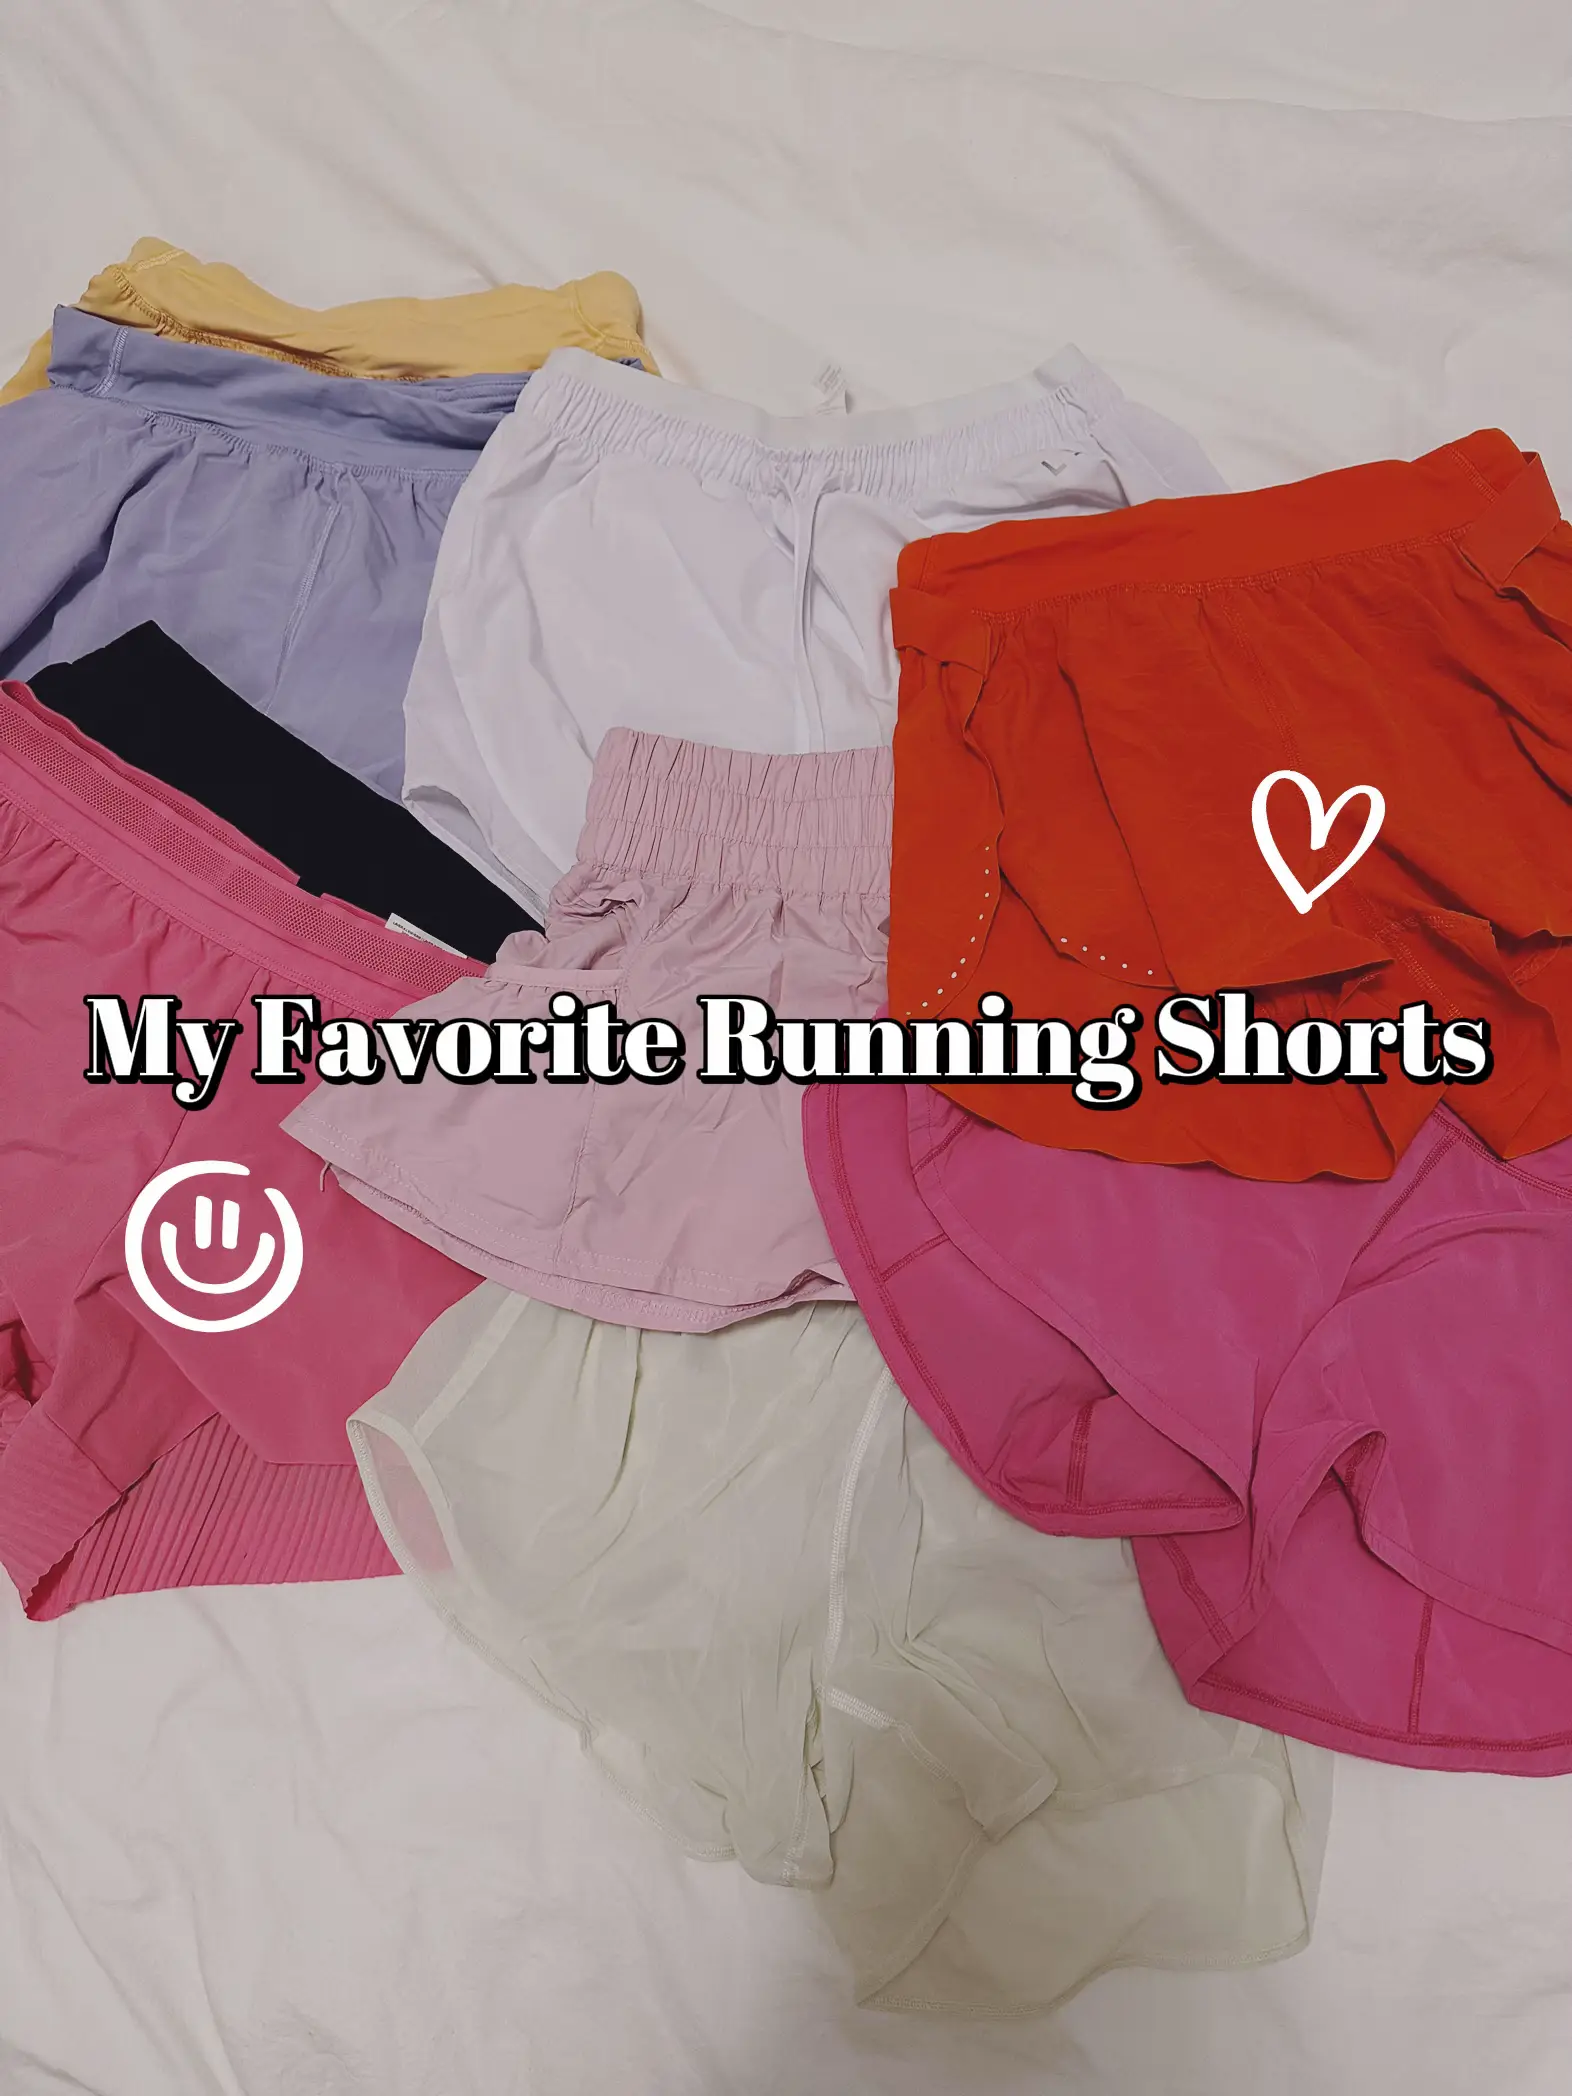 these shorts are a game changer…. I'm obsessed @NVGTN 😍😍 #fyp #nvgtn